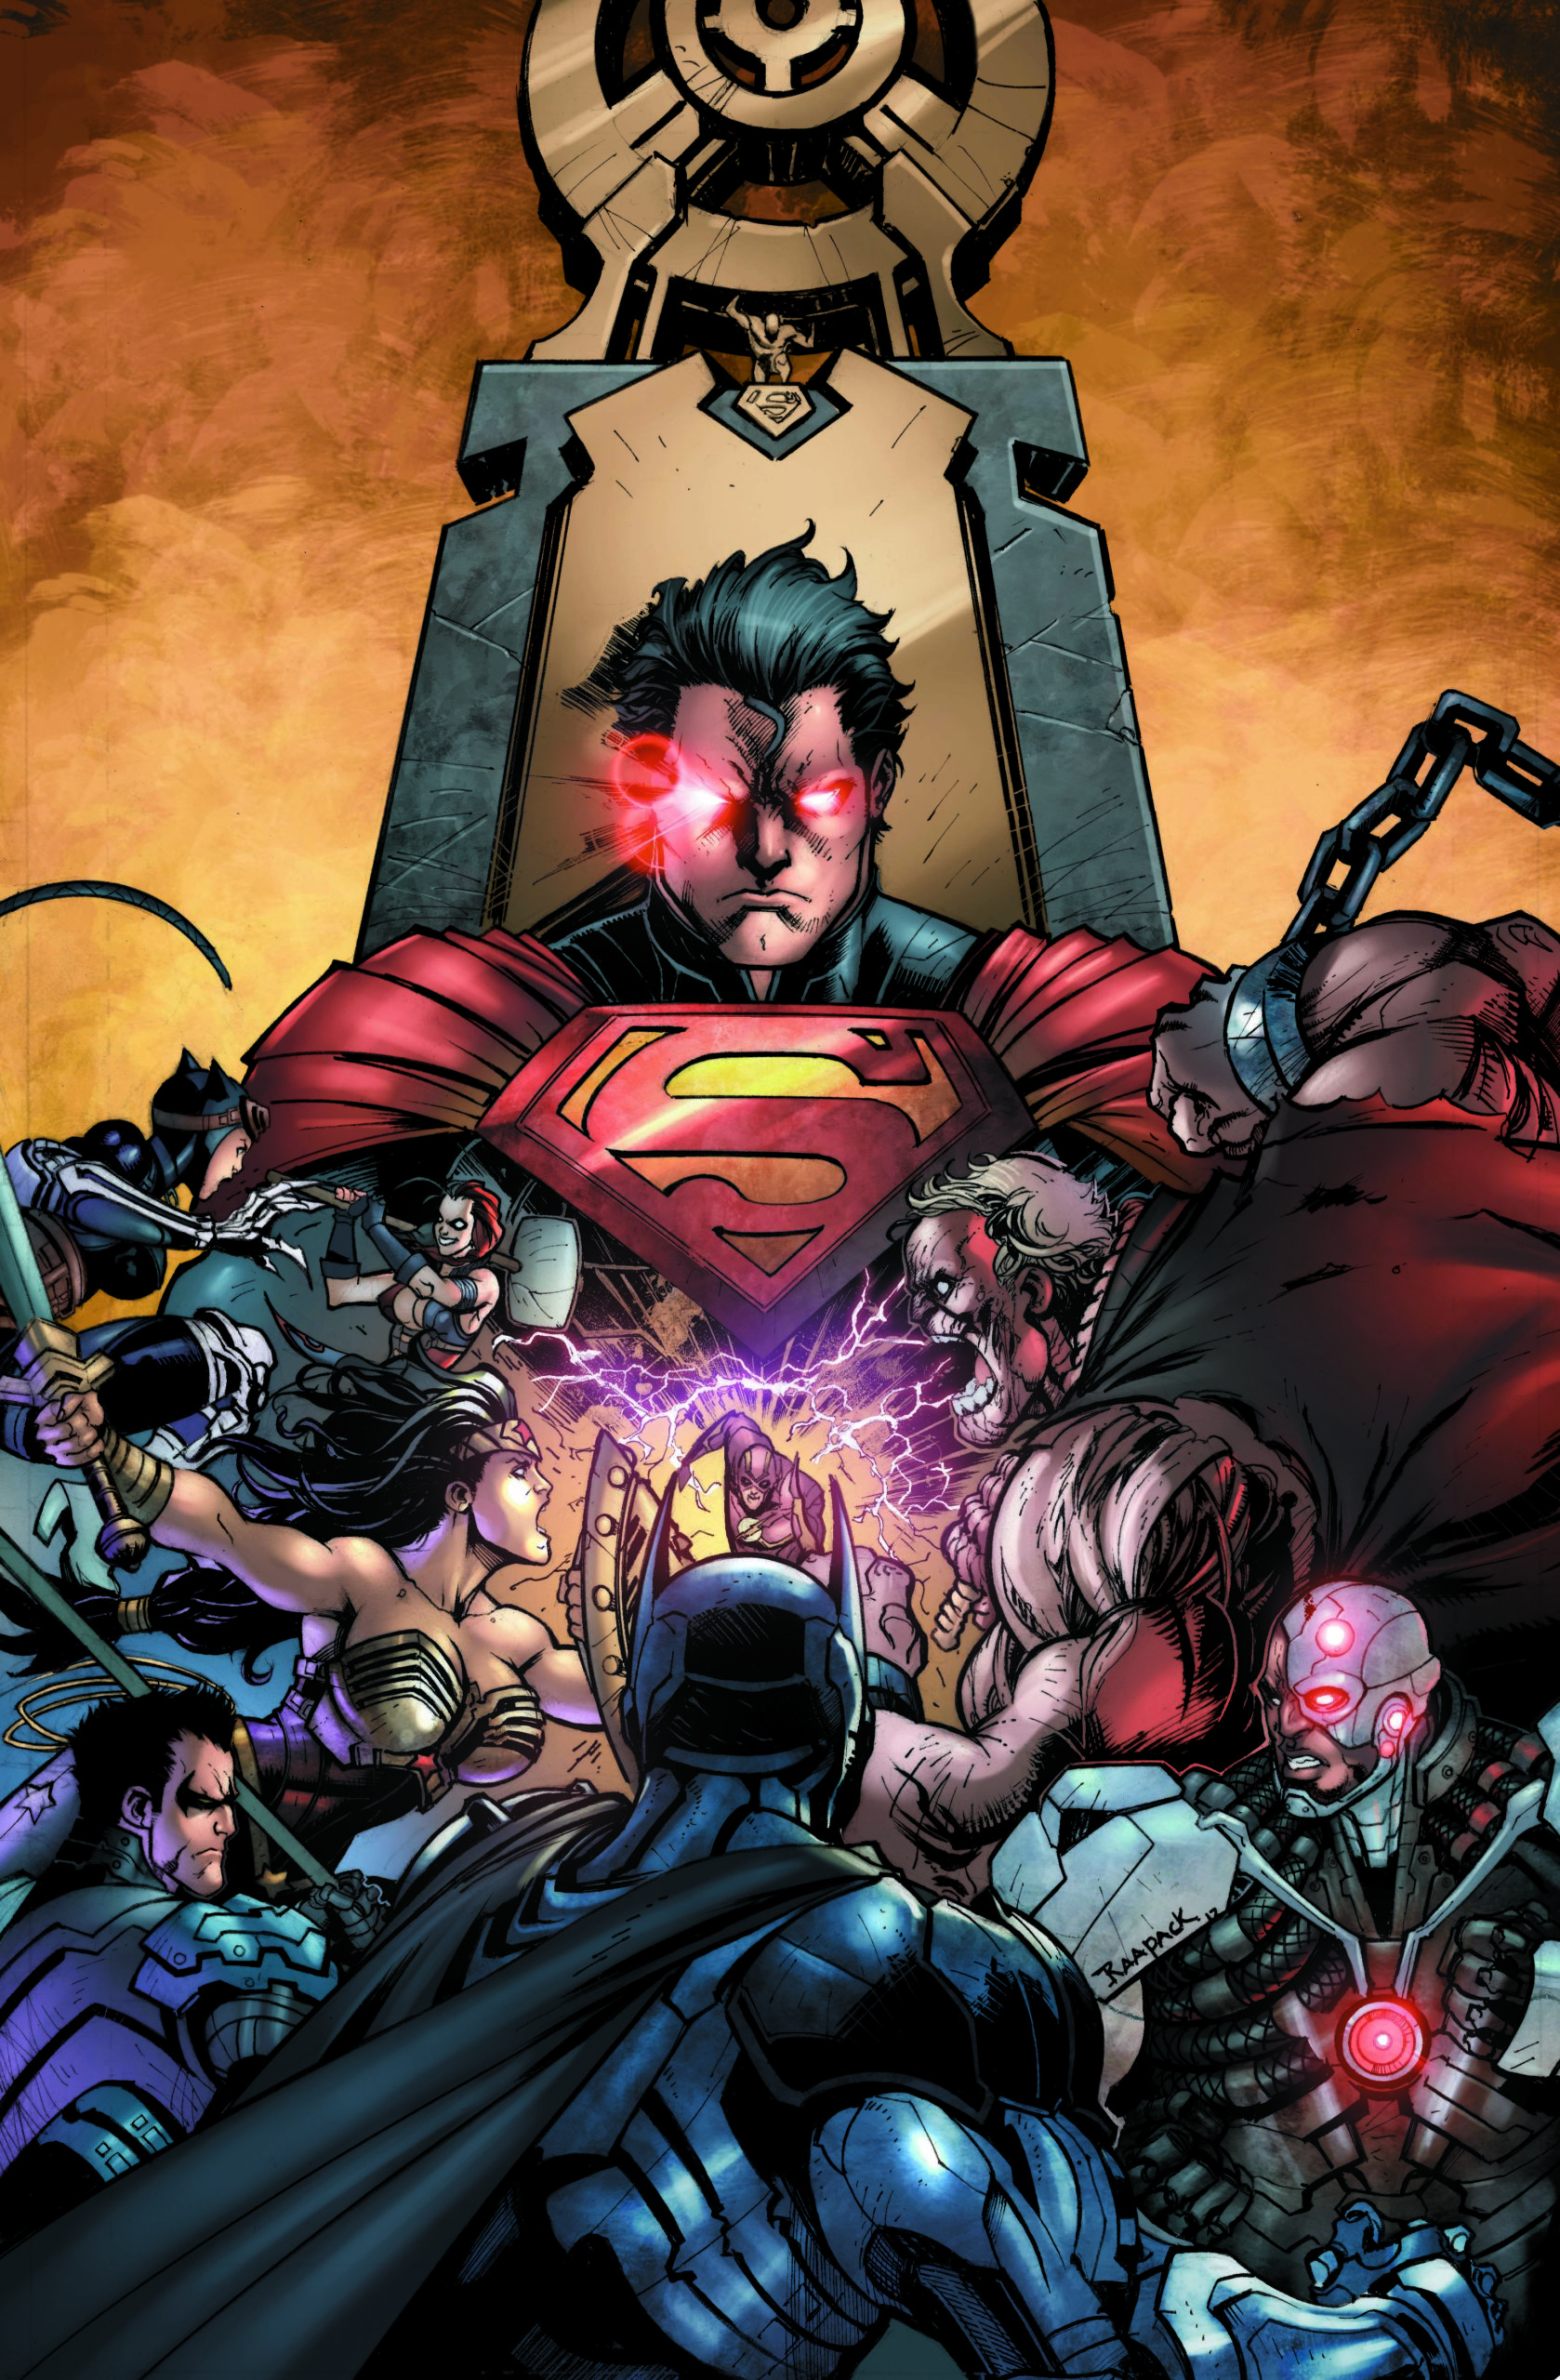 Injustice Is Next In Line For DC Animated Movie - LRM